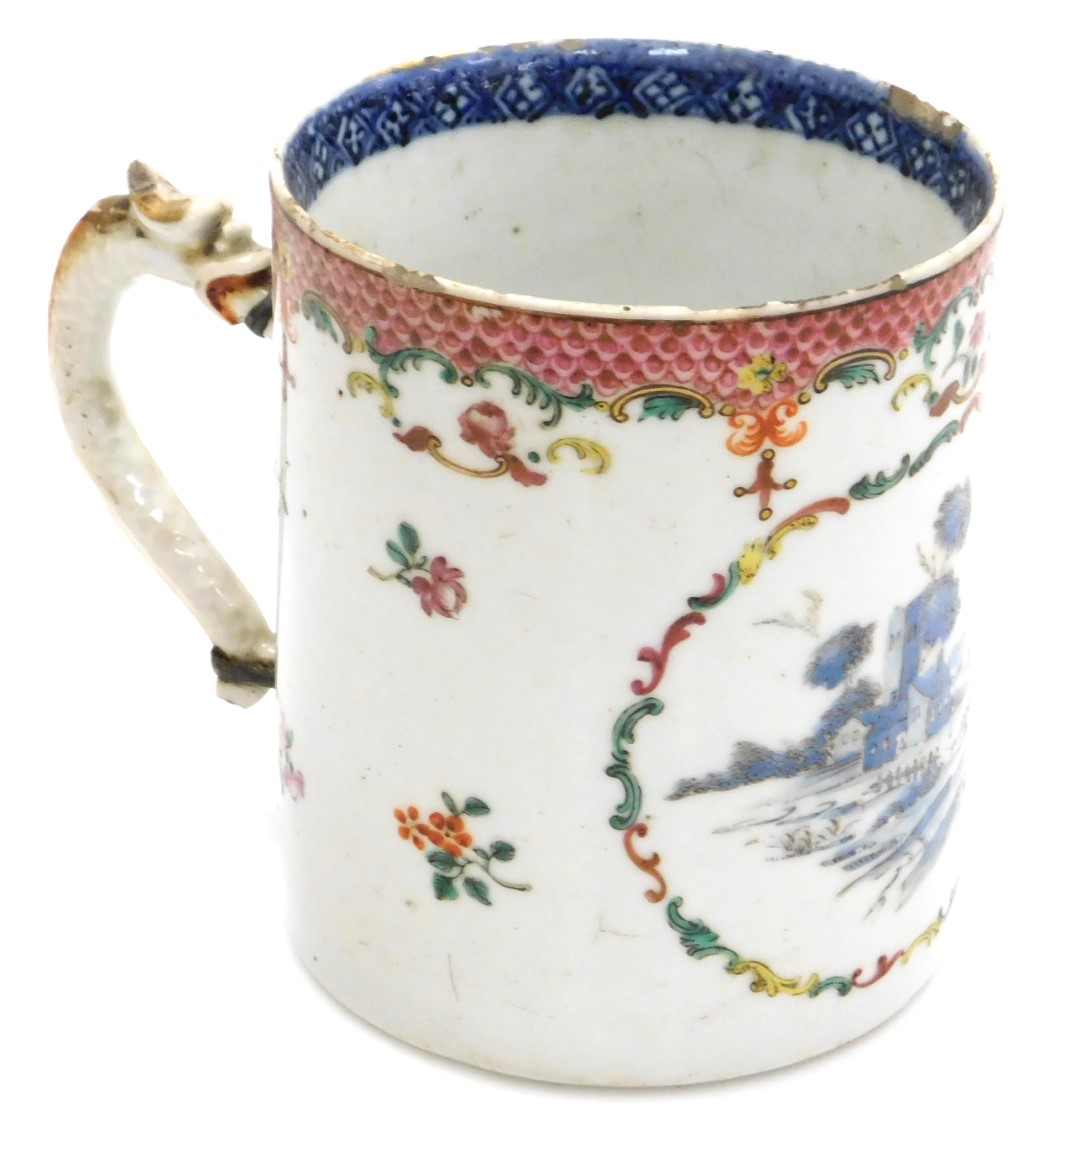 A late 18thC Qing dynasty export porcelain tankard, with a dragon handle, decorated in shades of blu